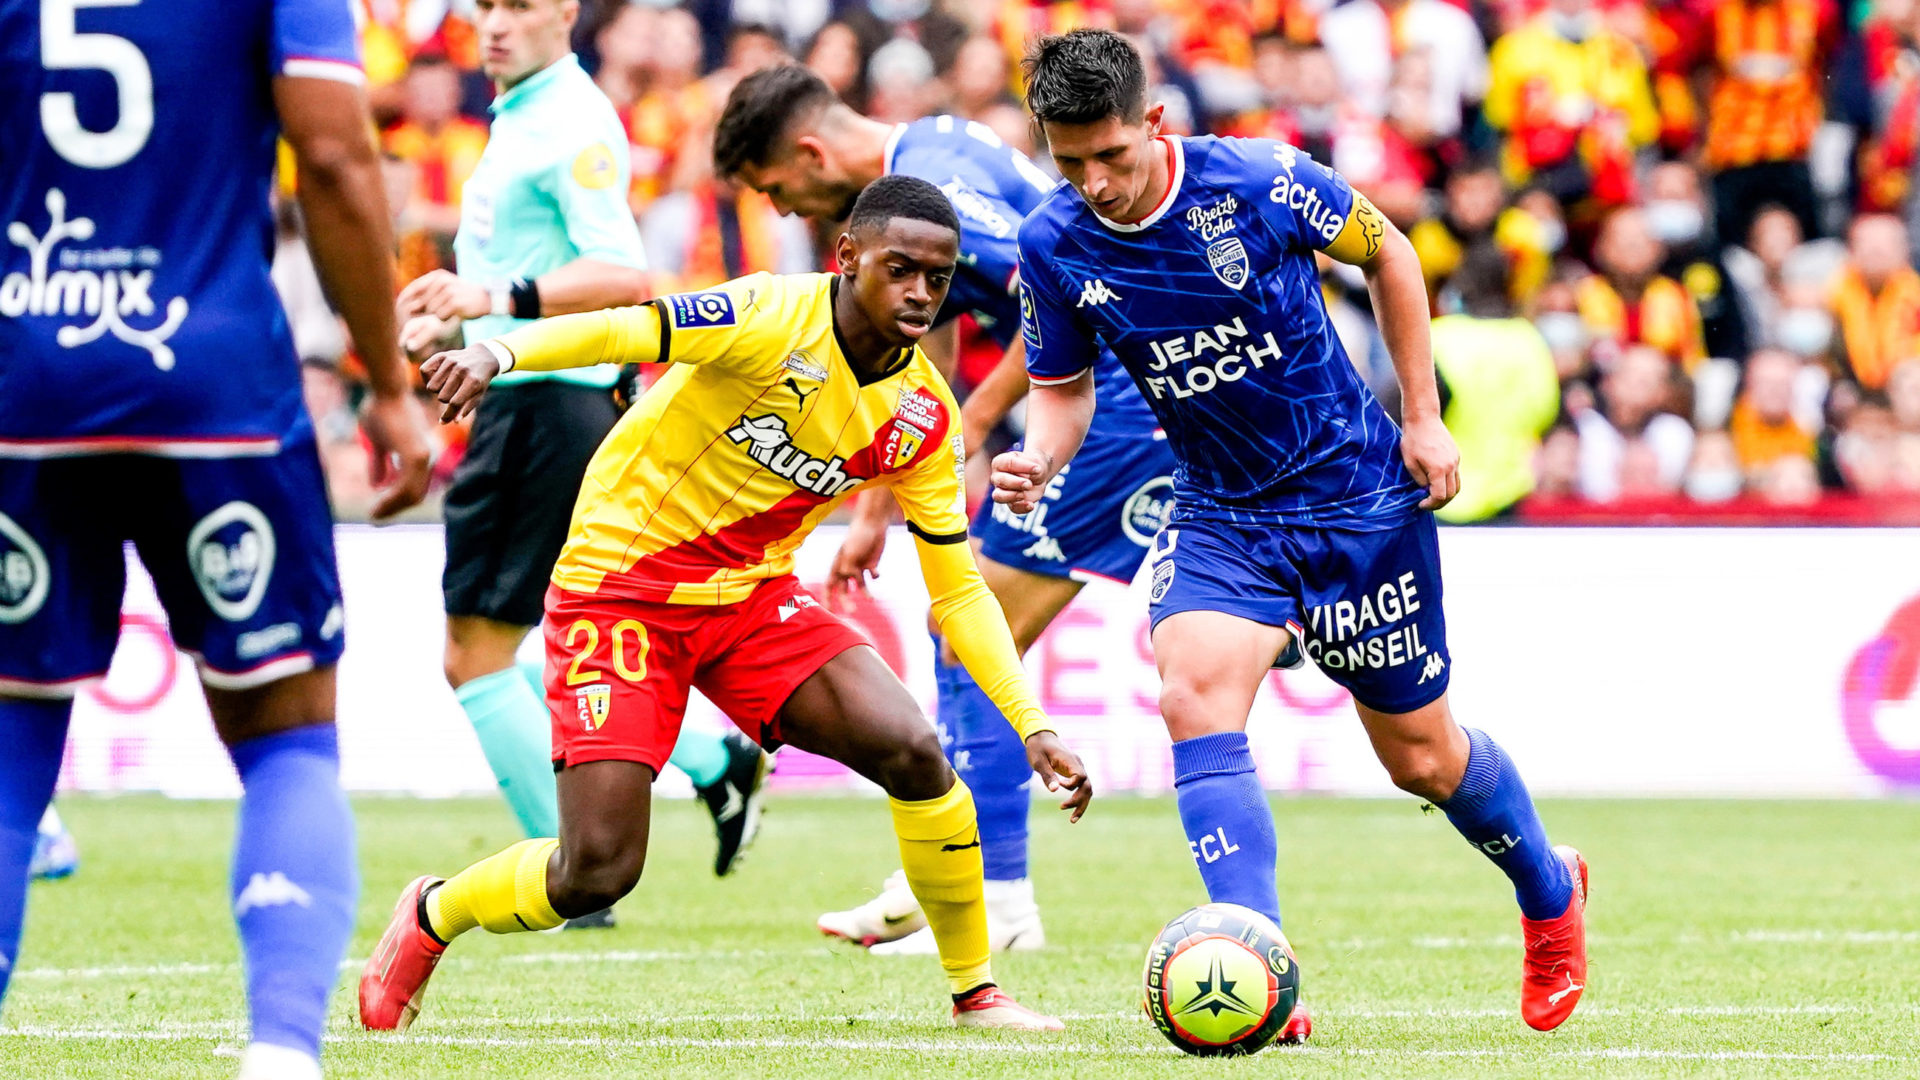 David PEREIRA DA COSTA of RC Lens and Laurent ABERGEL of FC Lorient during the Ligue 1 Uber Eats match between Lens and Lorient at Stade Bollaert-Delelis on August 29, 2021 in Lens, France. (Photo by Hugo Pfeiffer/Icon Sport) - Stade Bollaert-Delelis - Lens (France)